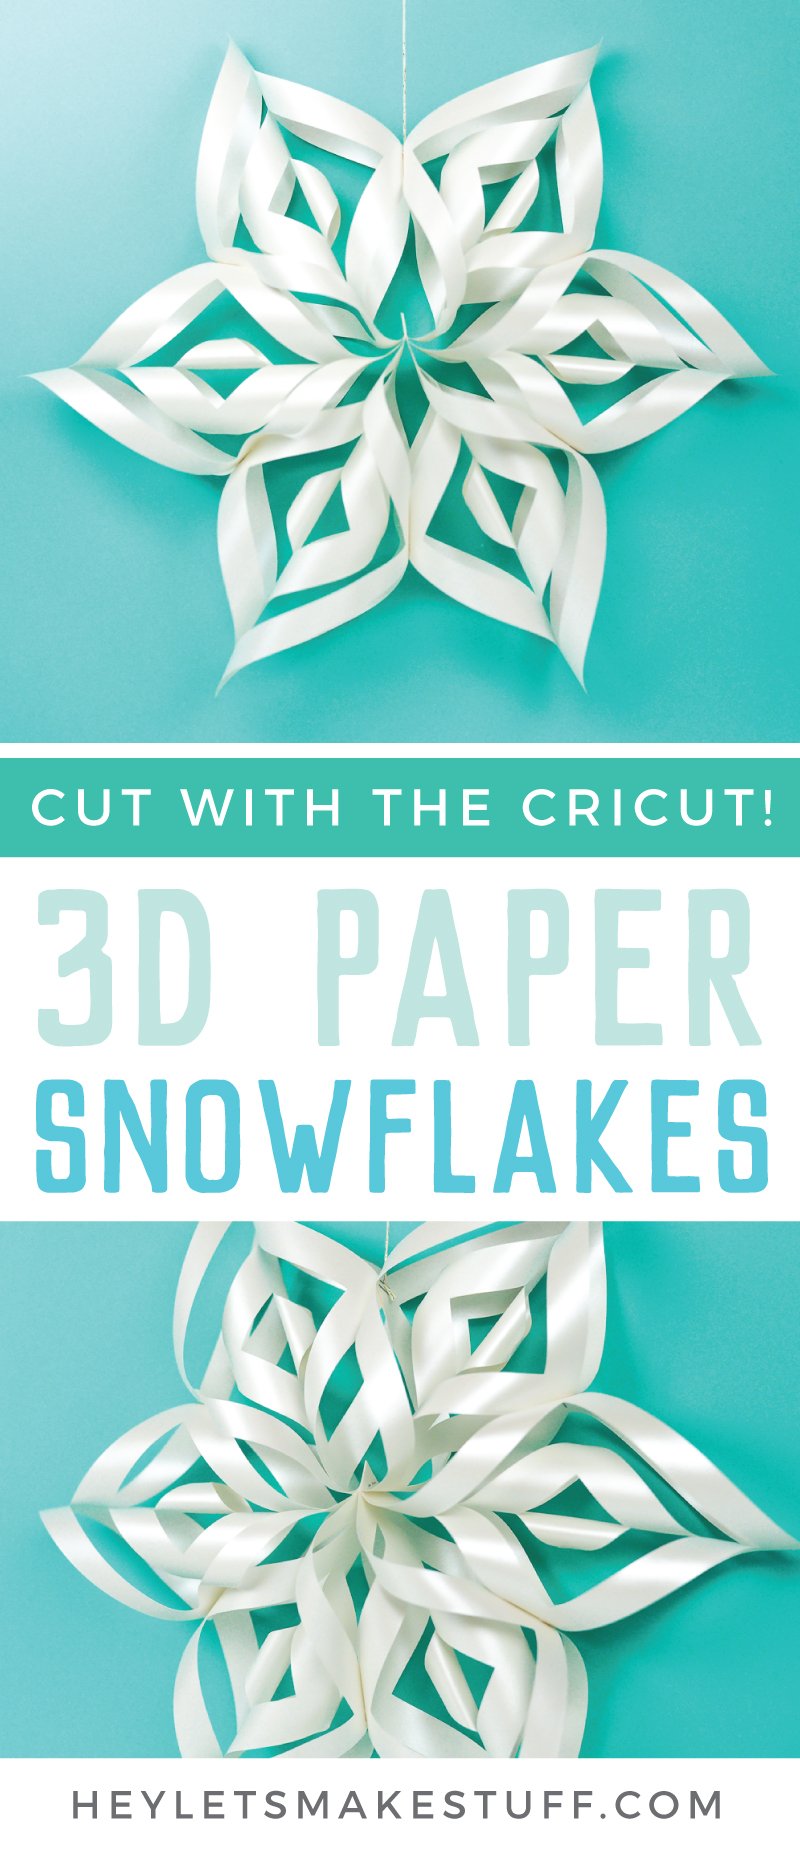 3D Paper snowflakes with advertisement from HEYLETSMAKESTUFF.COM on how to cut 3D paper Snowflakes with the Cricut